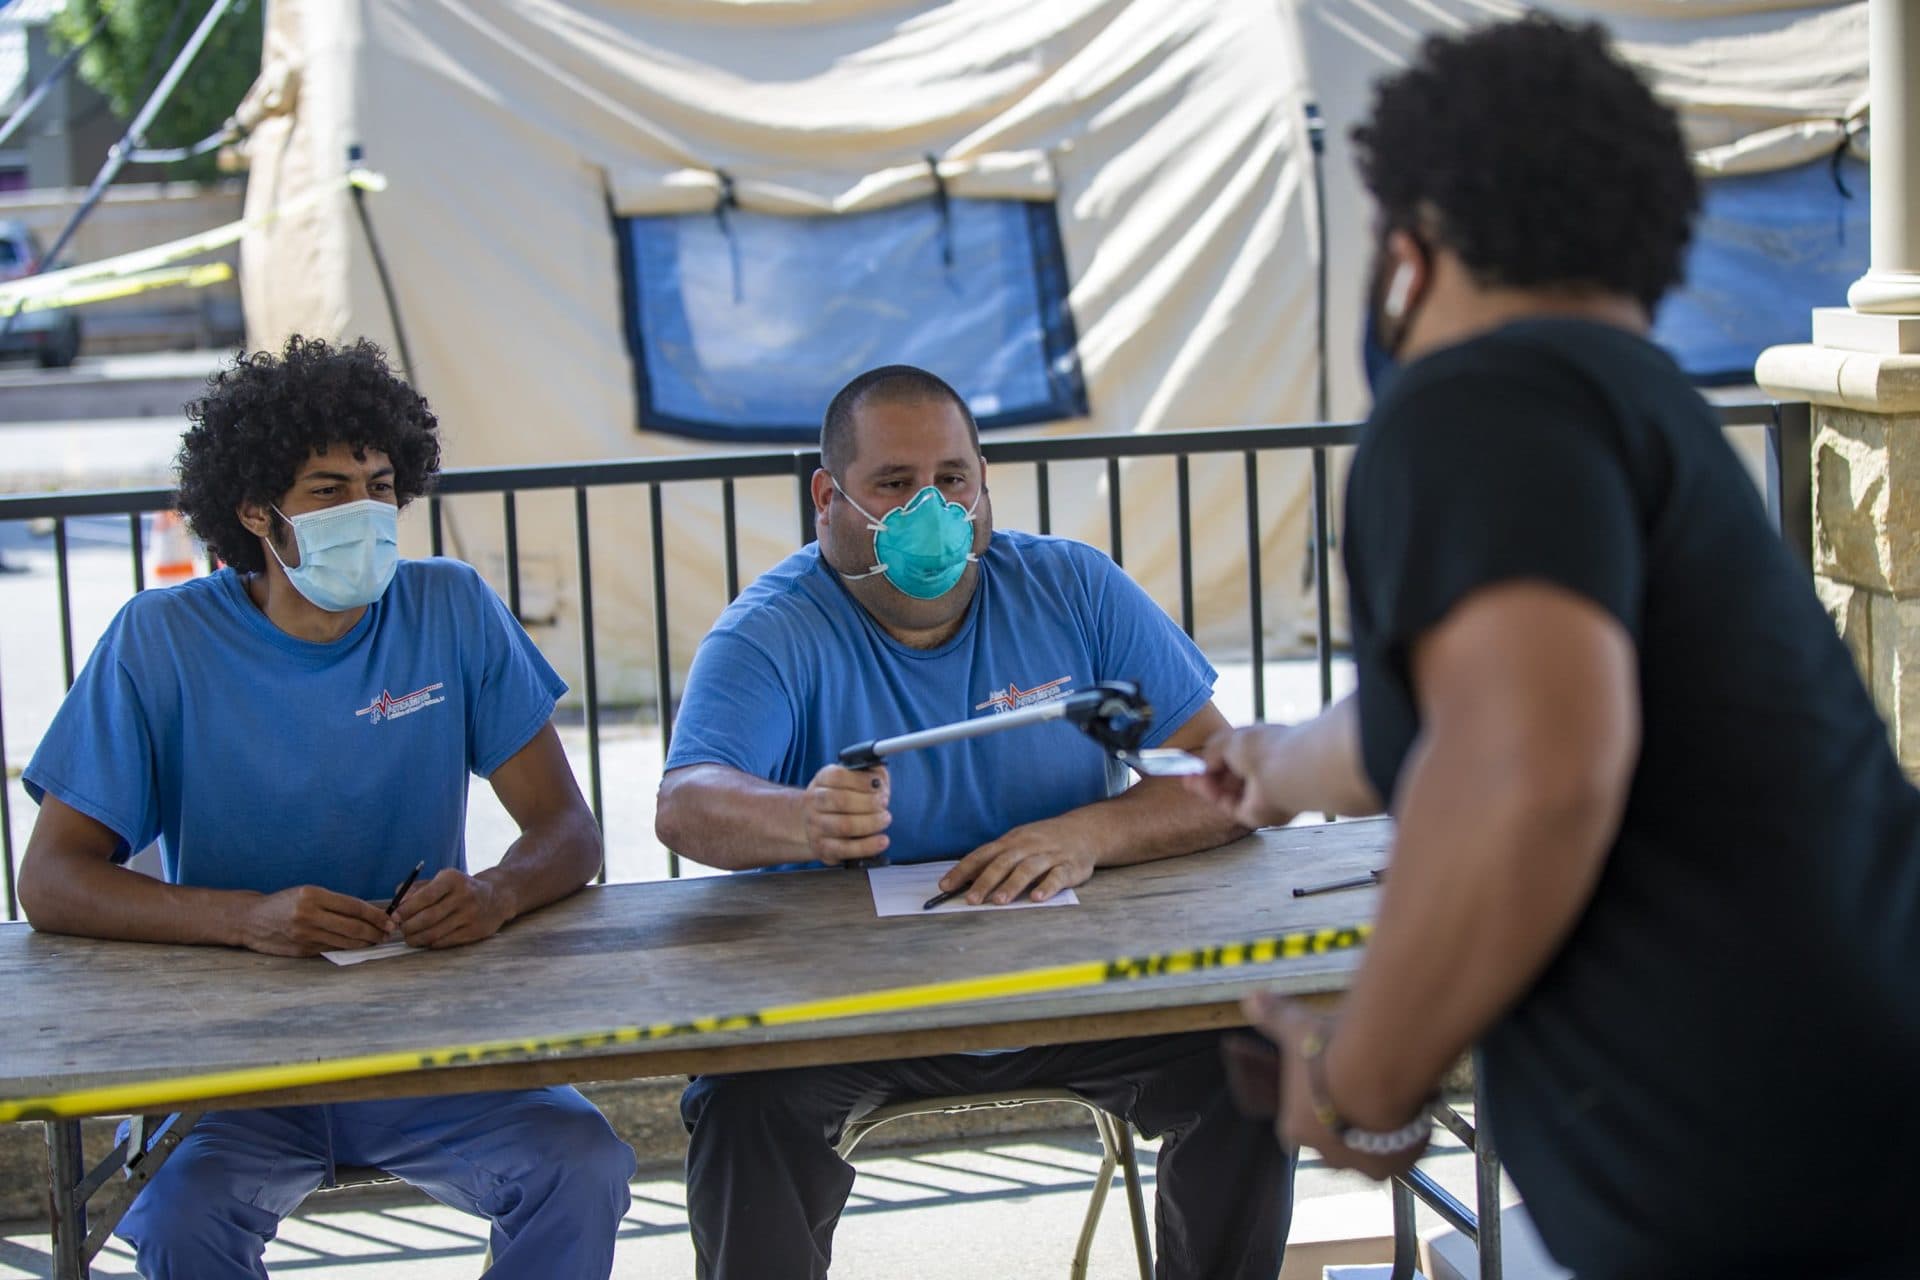 Health workers at the Rhode Island College walk-up testing site in Central Falls use a reacher tool to take the identification from a man requesting to be tested for COVID-19. (Jesse Costa/WBUR)